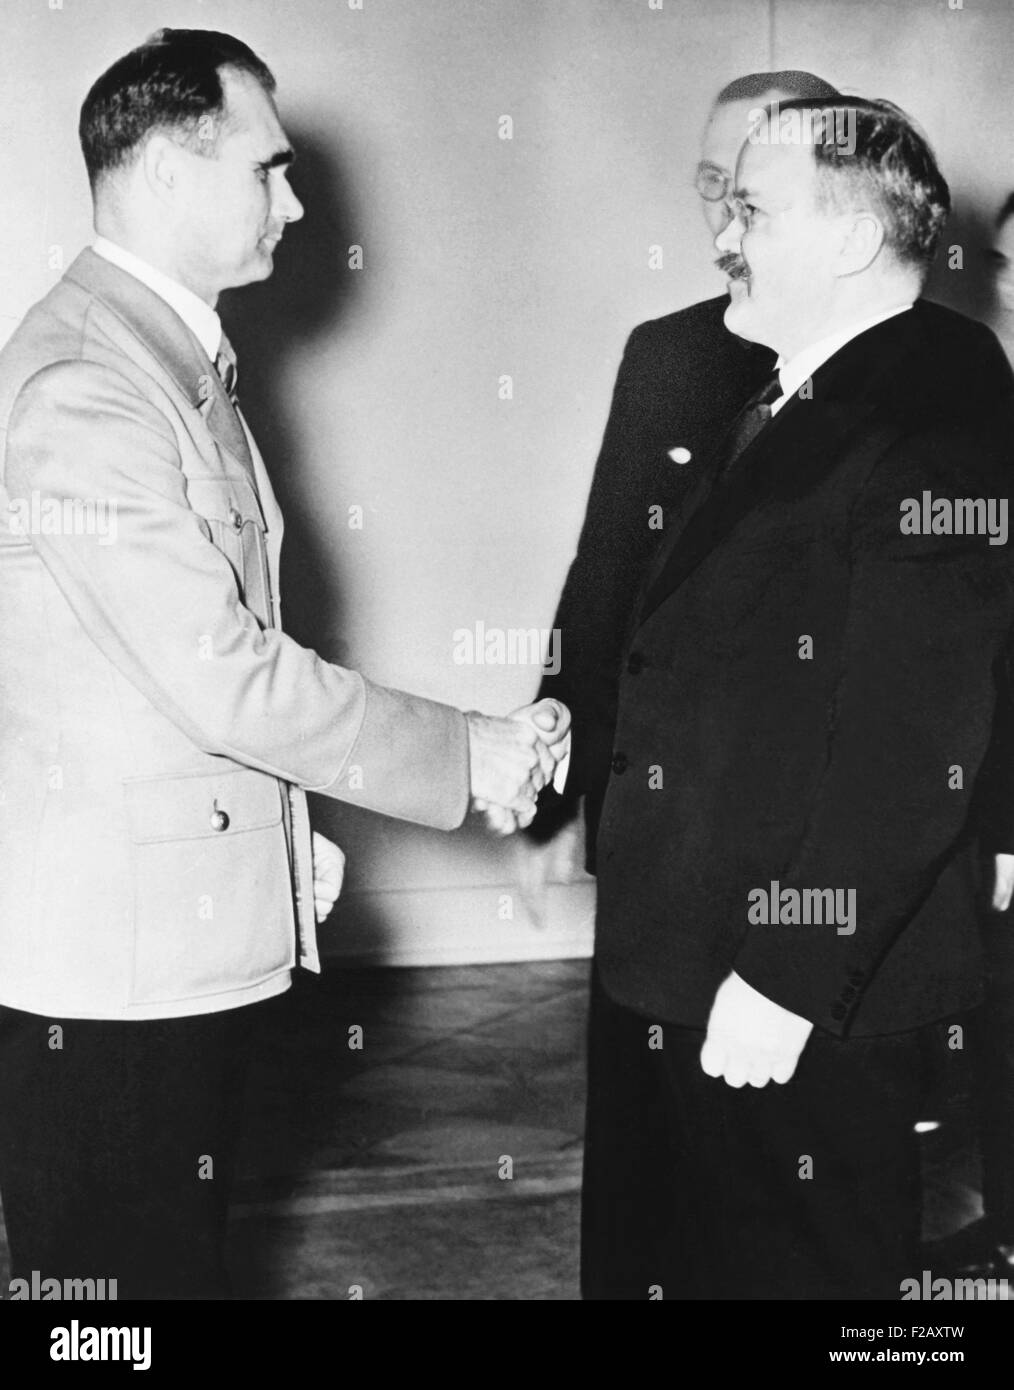 Rudolf Hess (left) greeted Russian Premier Vyacheslav Molotov in Berlin on Nov. 12, 1940. Molotov's discussions with Hitler concerned the division of the world among Germany, Italy, Japan, and the USSR, after the presumed defeat of Britain. (CSU 2015 9 960) Stock Photo